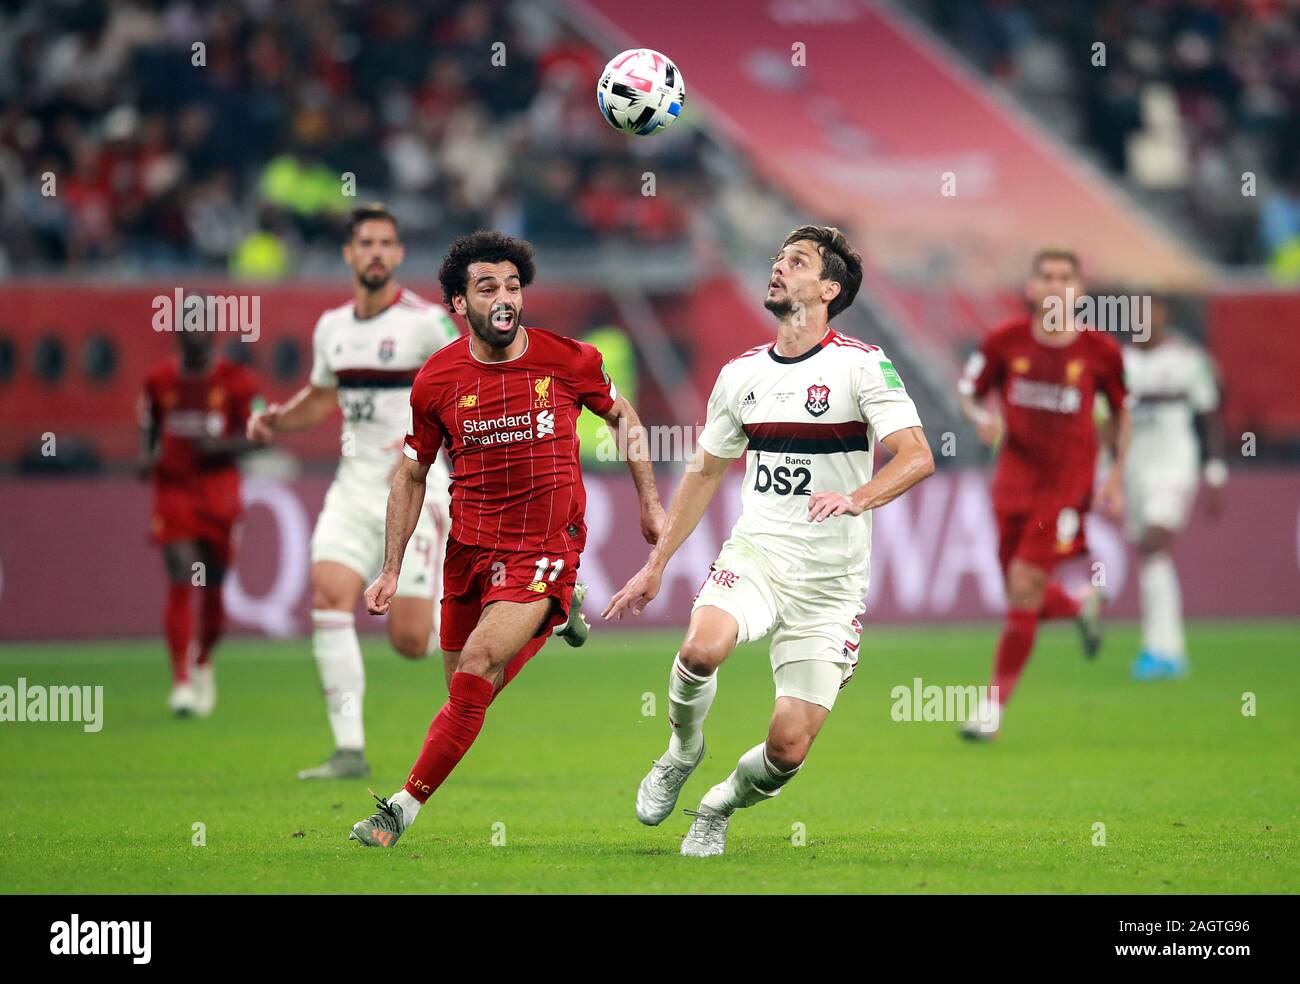 Liverpool's Mohamed Salah (left) and Flamengo's Rodrigo Caio (right) battle for the ball during the FIFA Club World Cup final at the Khalifa International Stadium, Doha. Stock Photo